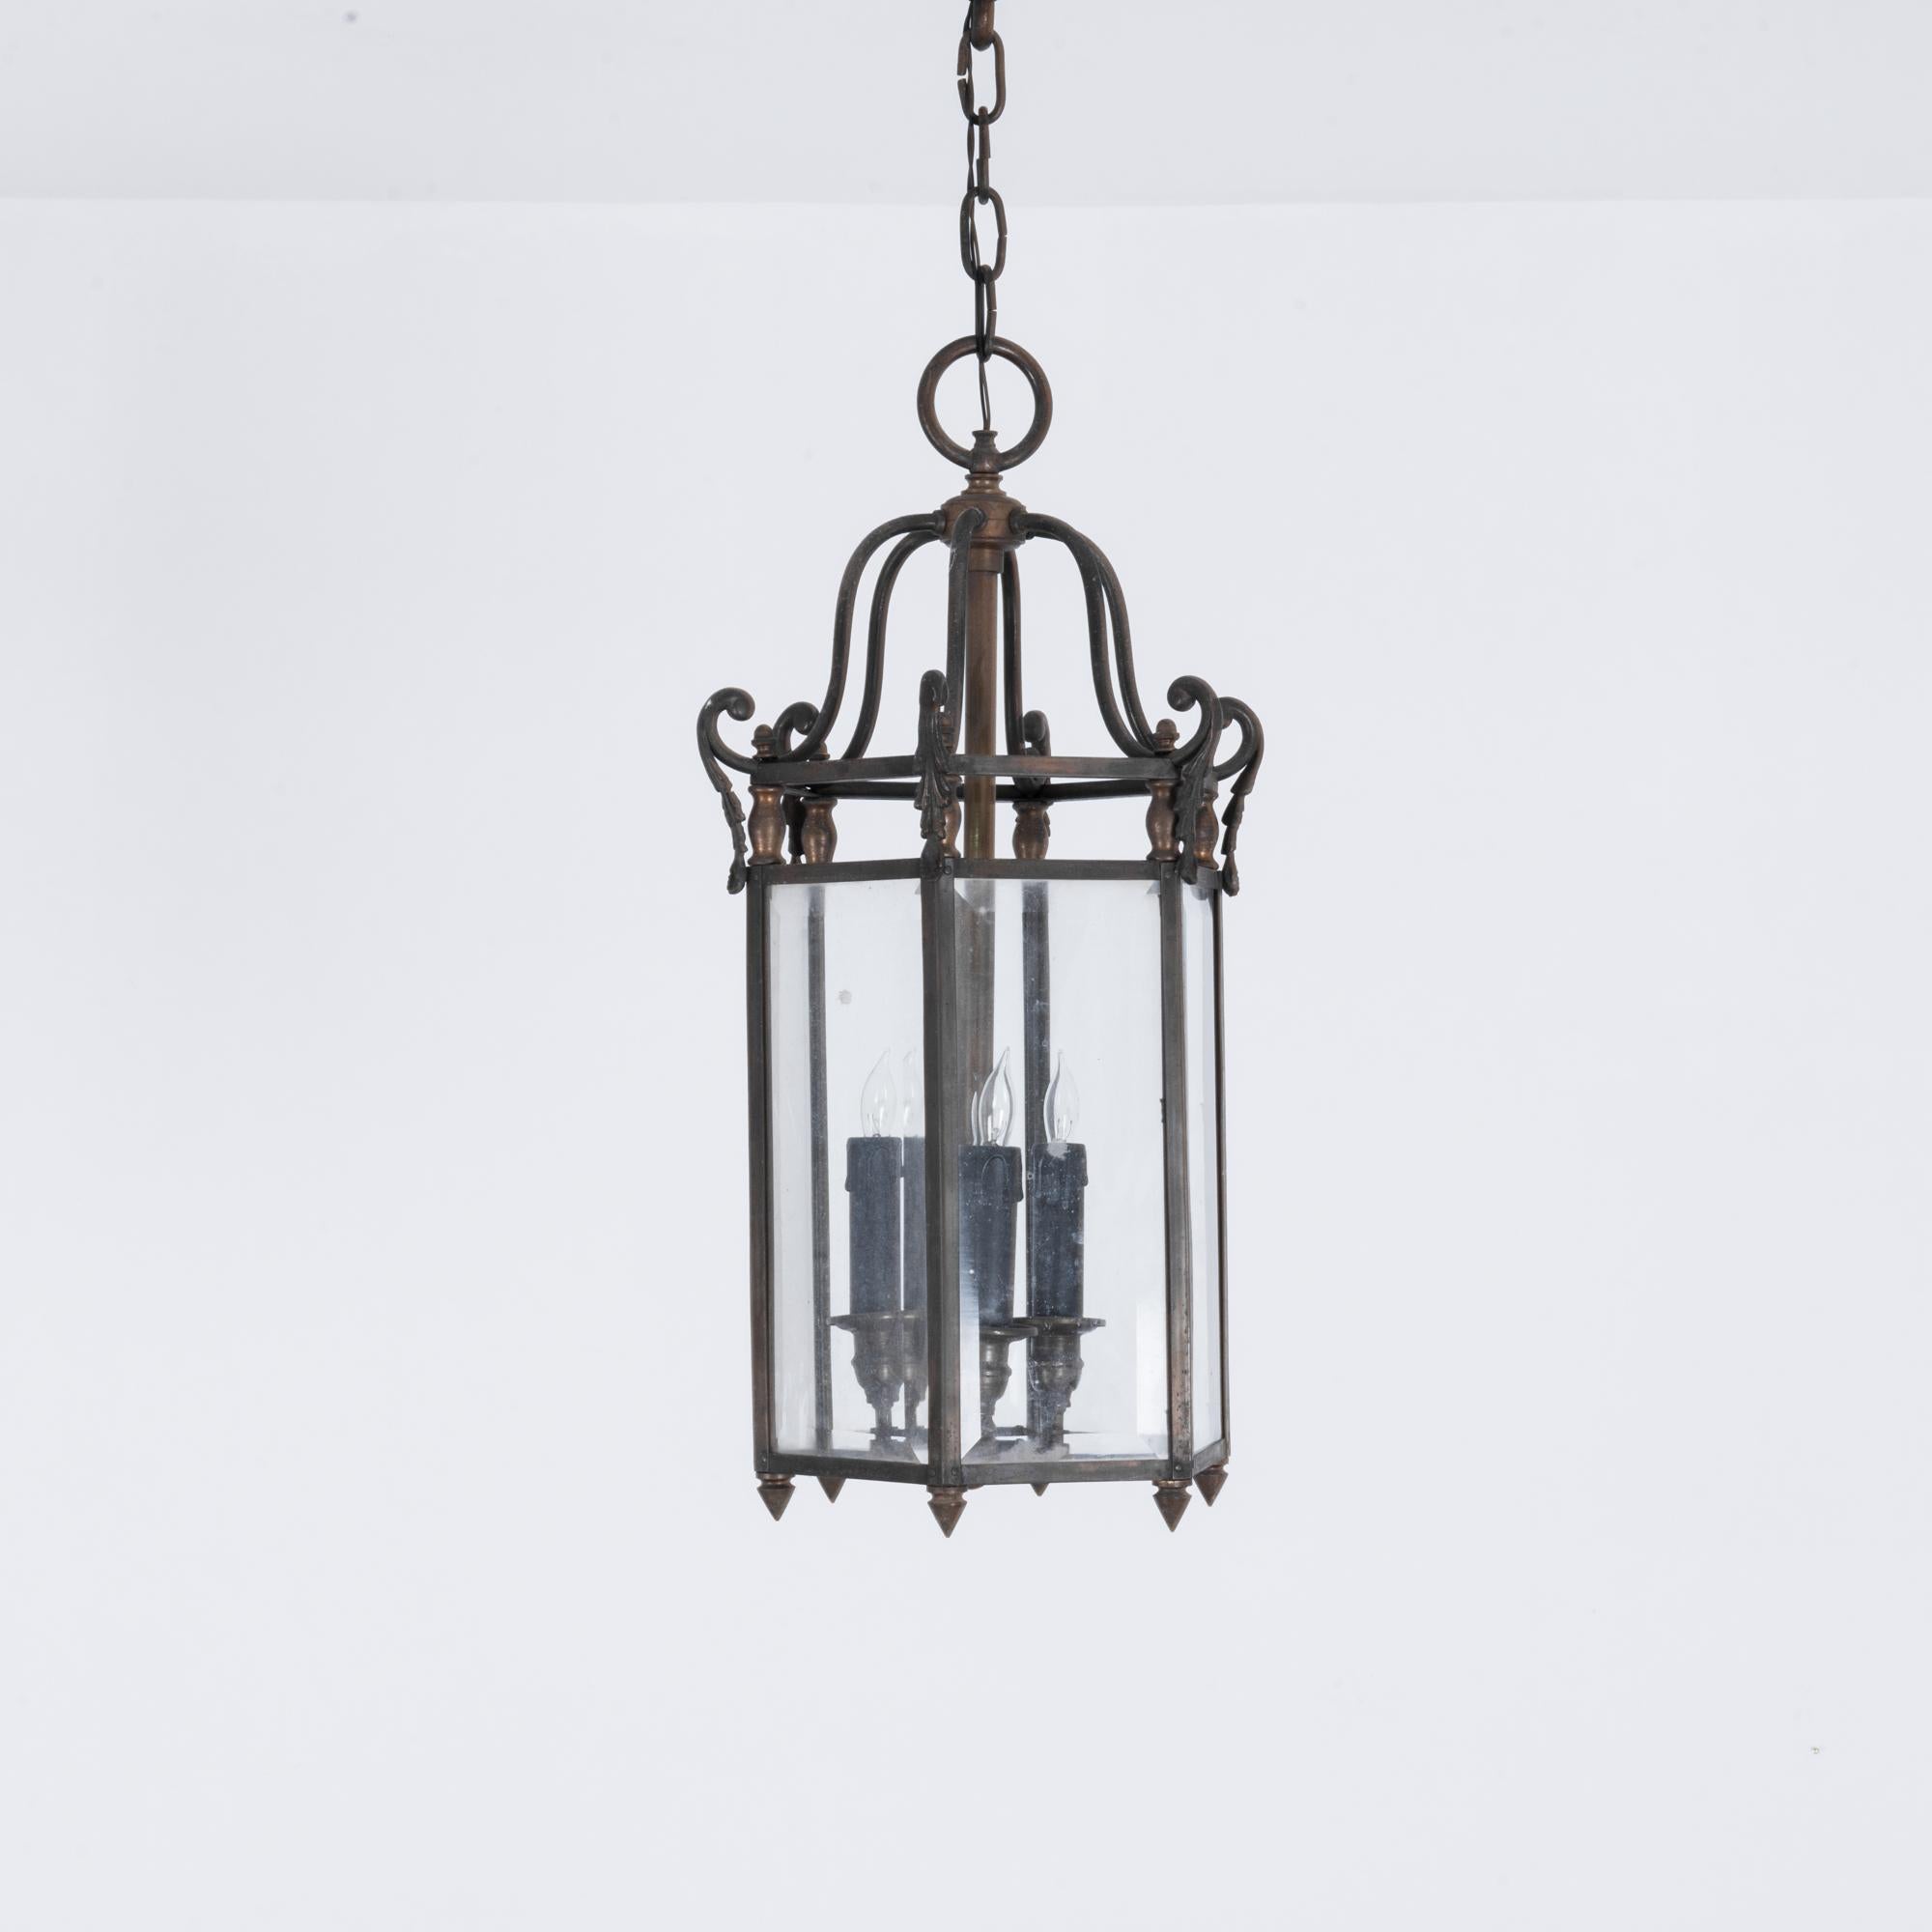 An electric lantern from France, circa 1920. Six wings rise above lights housed in a glass hexagon; the soft orange glow from the chandelier in the entryway says “You’re Home”. A stylish addition for the discerning foyer; a classic old-world style